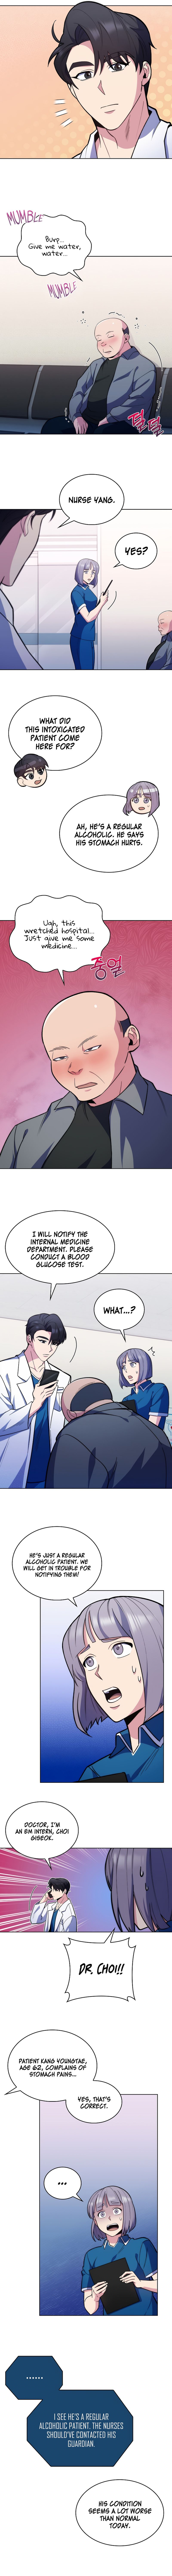 Level-Up Doctor (Manhwa) - Page 4